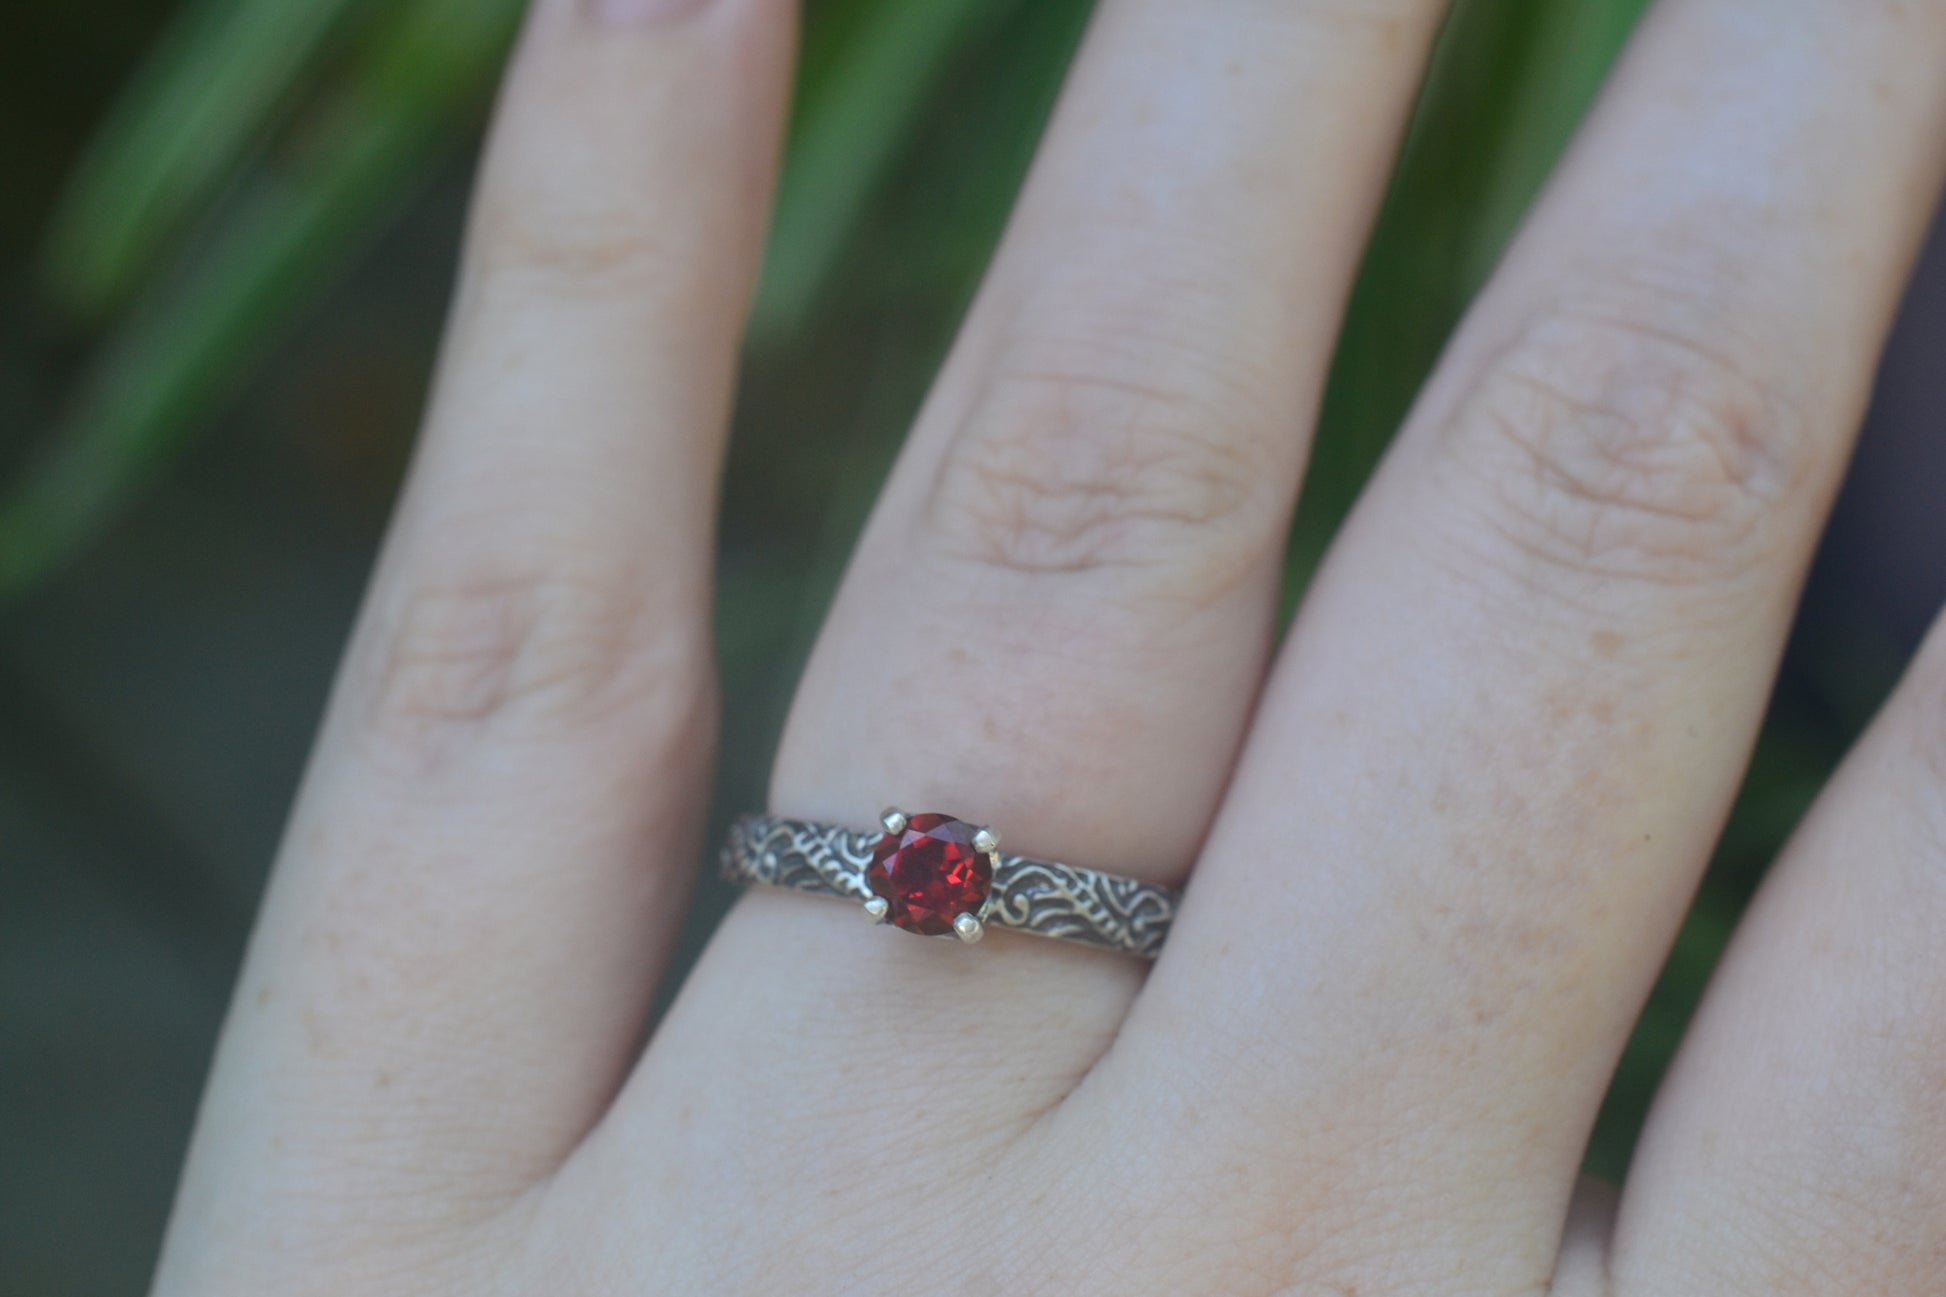 5mm Red Gemstone Engagement Ring in Silver